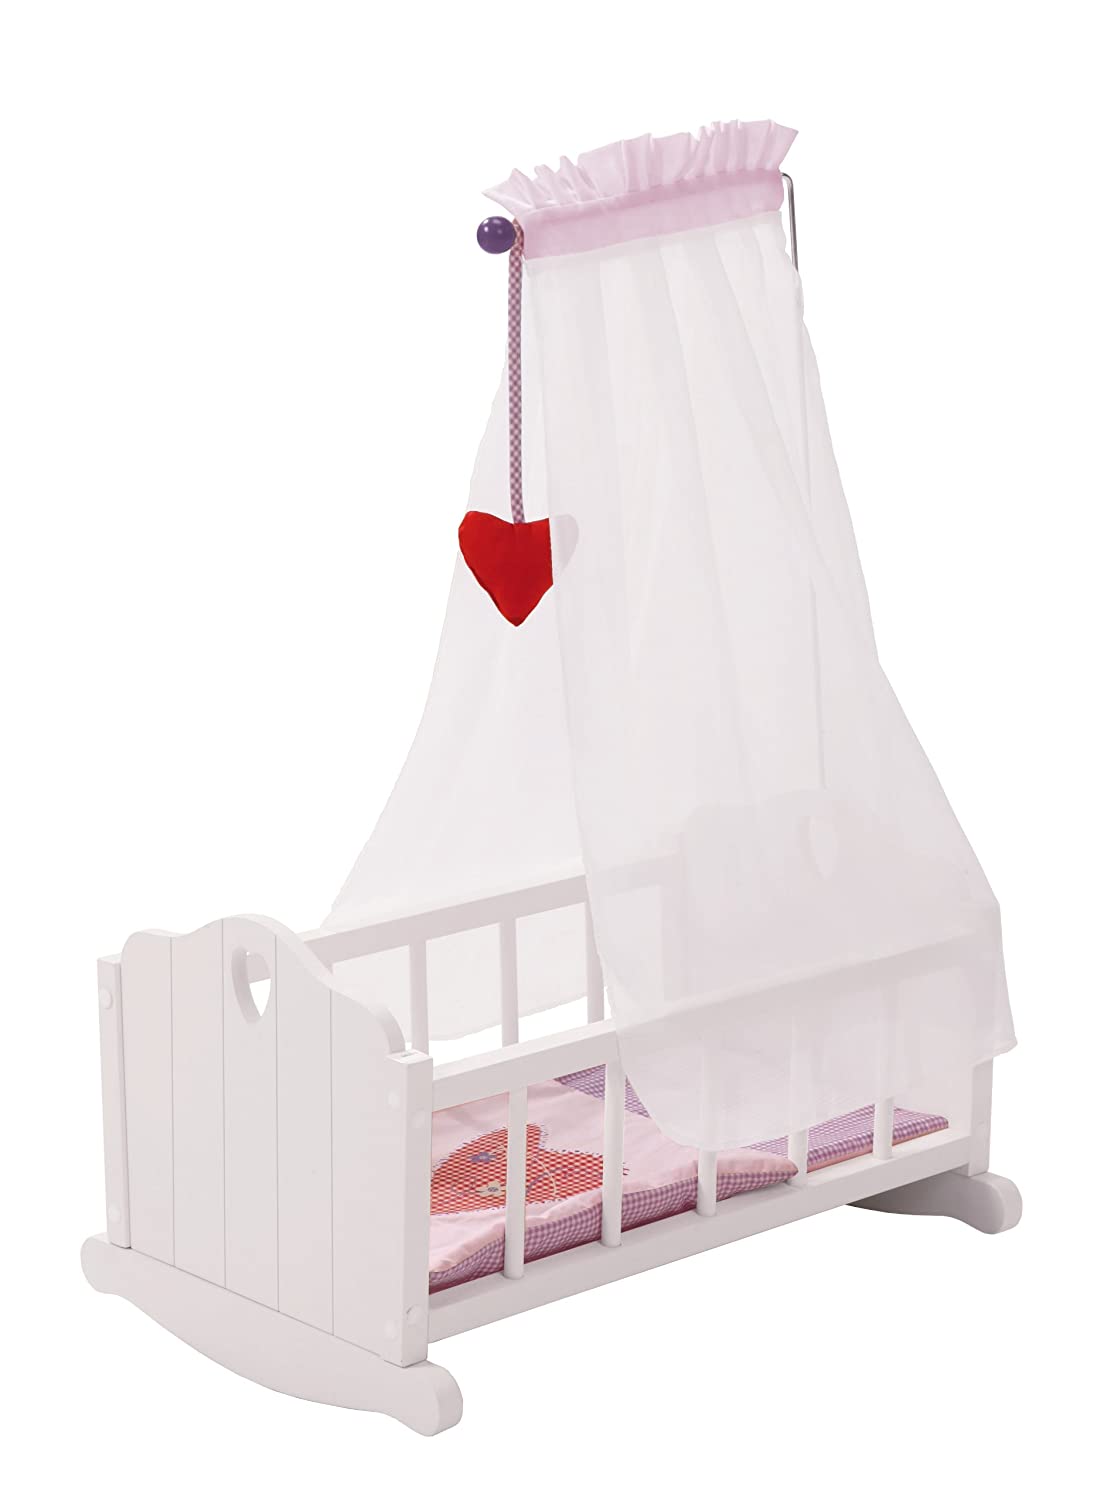 Roba Doll Bunk Bed Fienchen Doll Furniture Series, Dolls Bed Doll Accesso